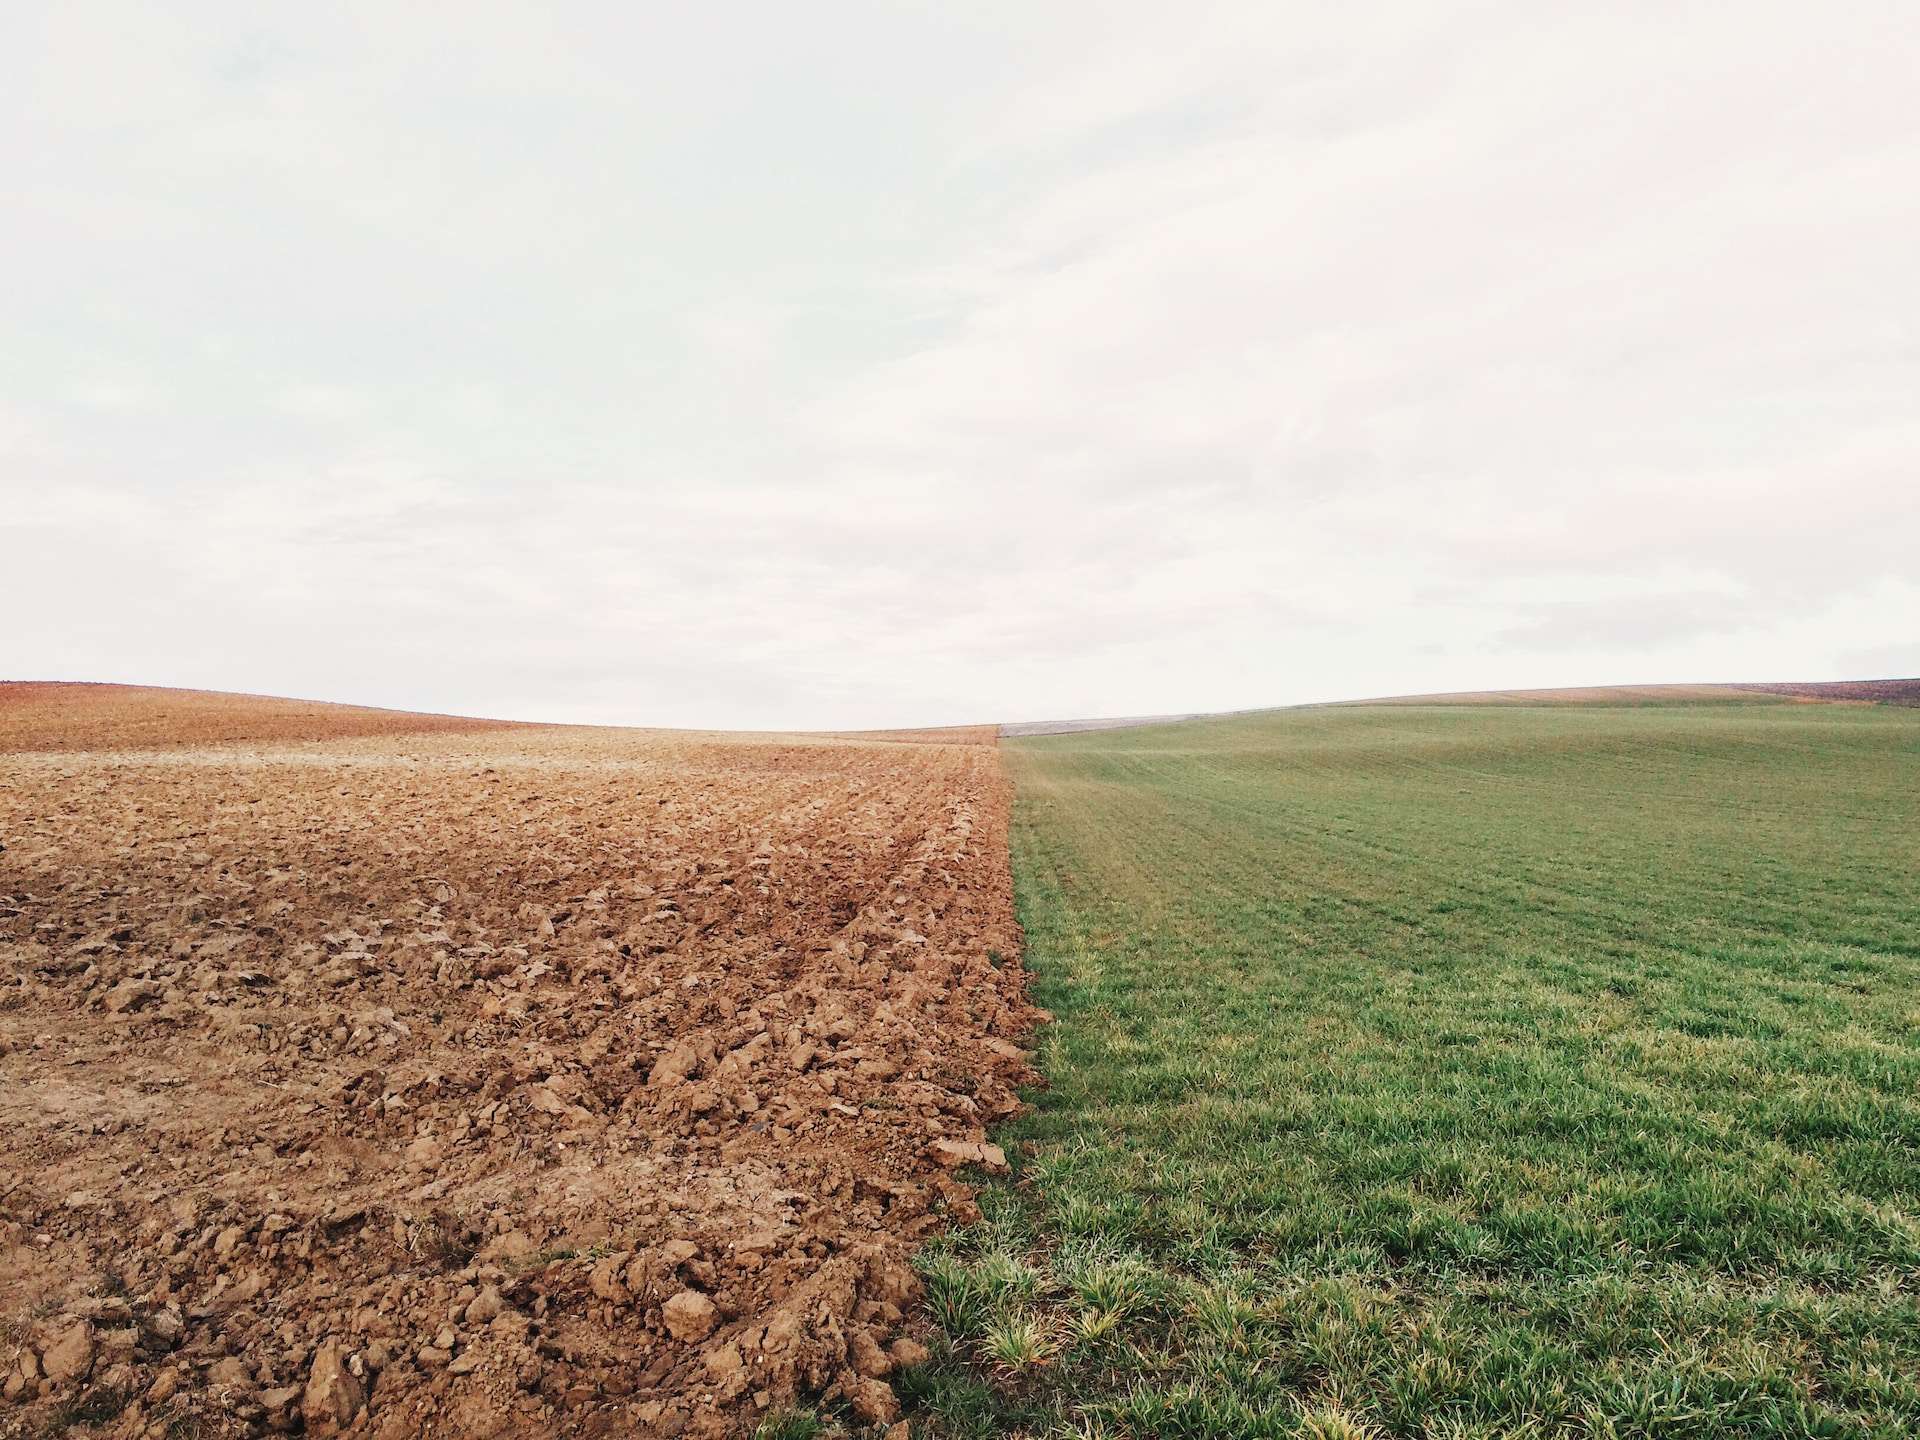 An image showing soil in a field, one half is tilled and one half is just grass